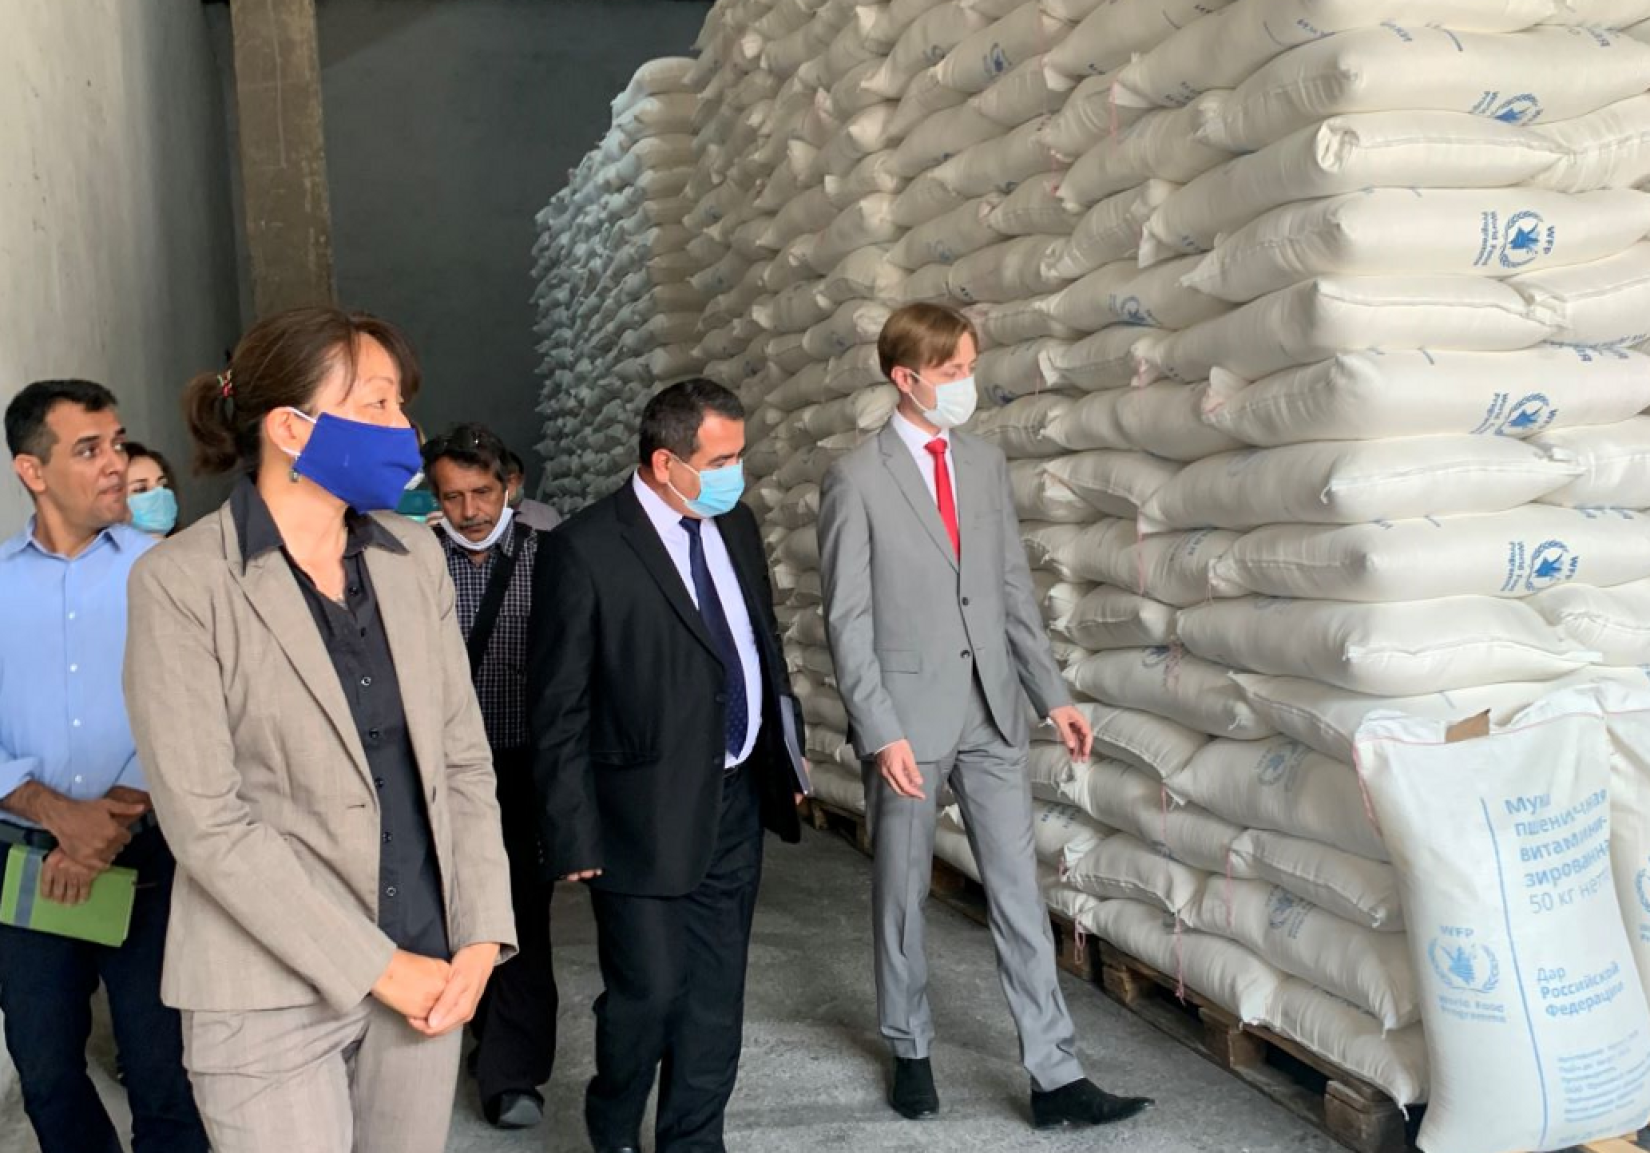 WFP received fortified wheat flour from the Russian Federation